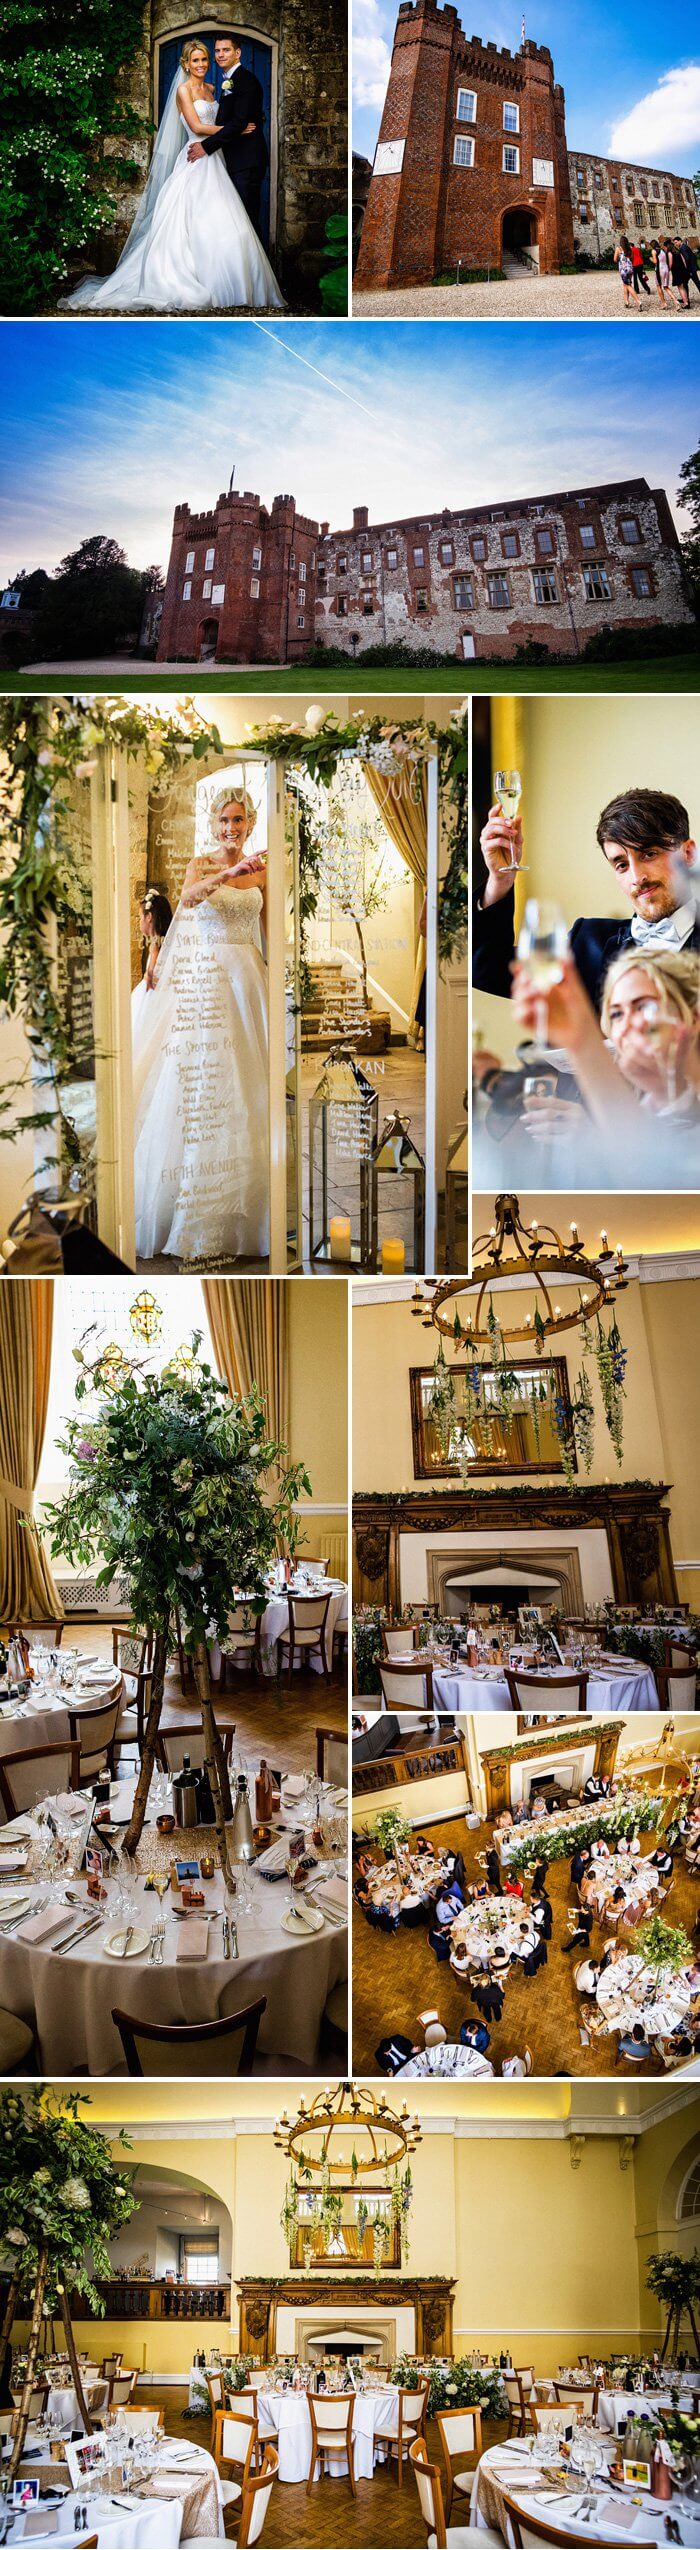 1632424767 269 English wedding in the castle 2 charming photo stories - English wedding in the castle | 2 charming photo stories with many inspirations